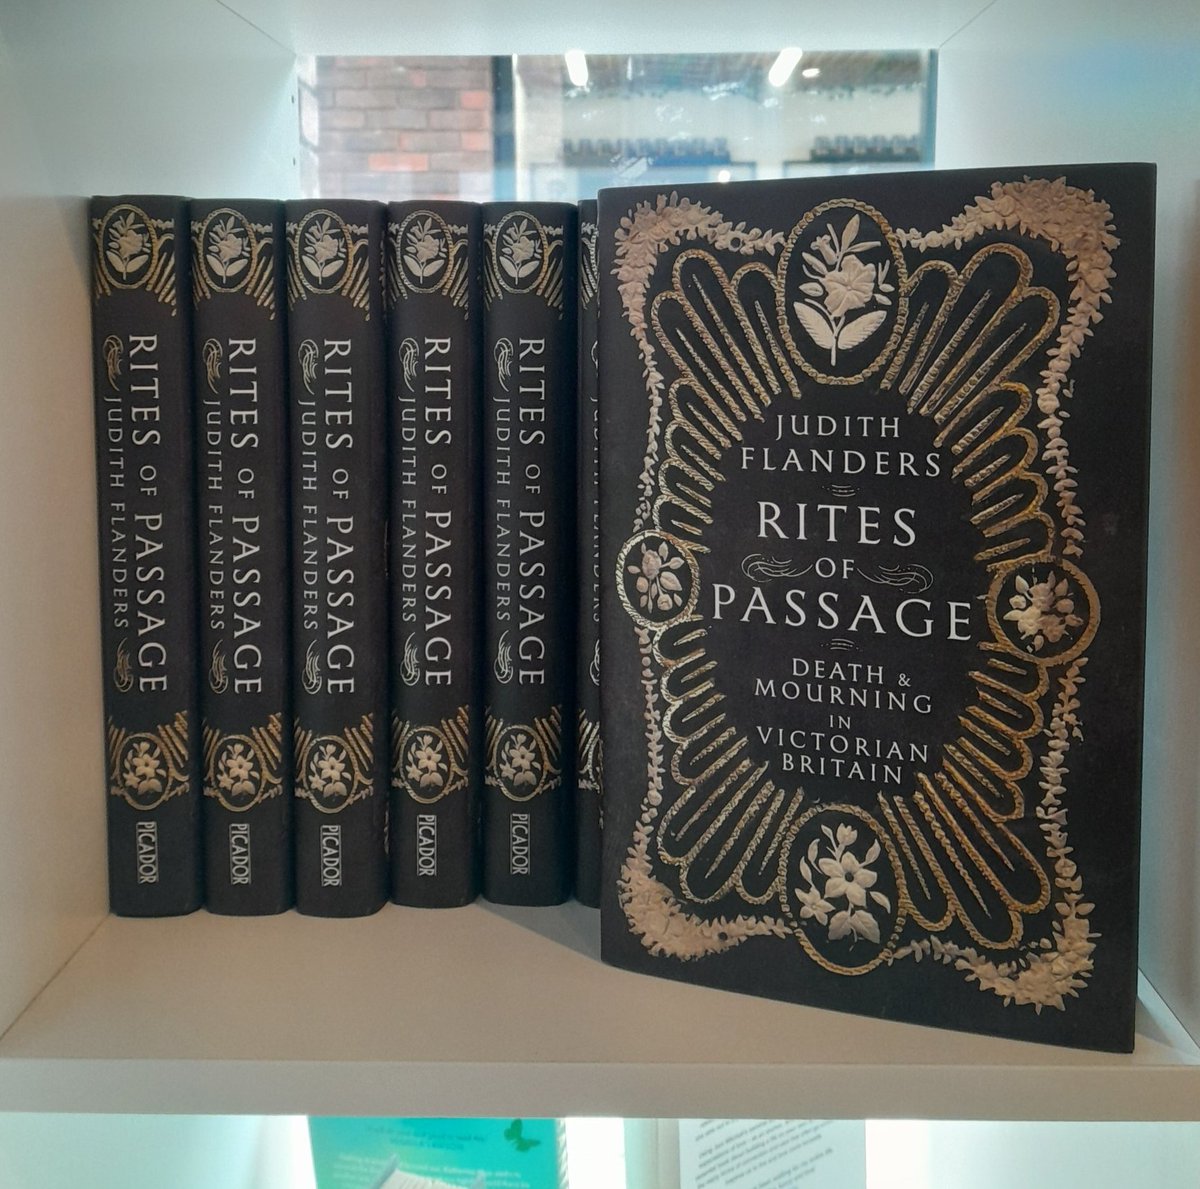 What a fascinating event we were treated to last night: Judith Flanders talking about her new book, Rites of Passage: Death & Mourning in Victorian Britain. Judith was kind enough to sign some books for us, so if you'd like a copy head down ASAP or give us a message to reserve!